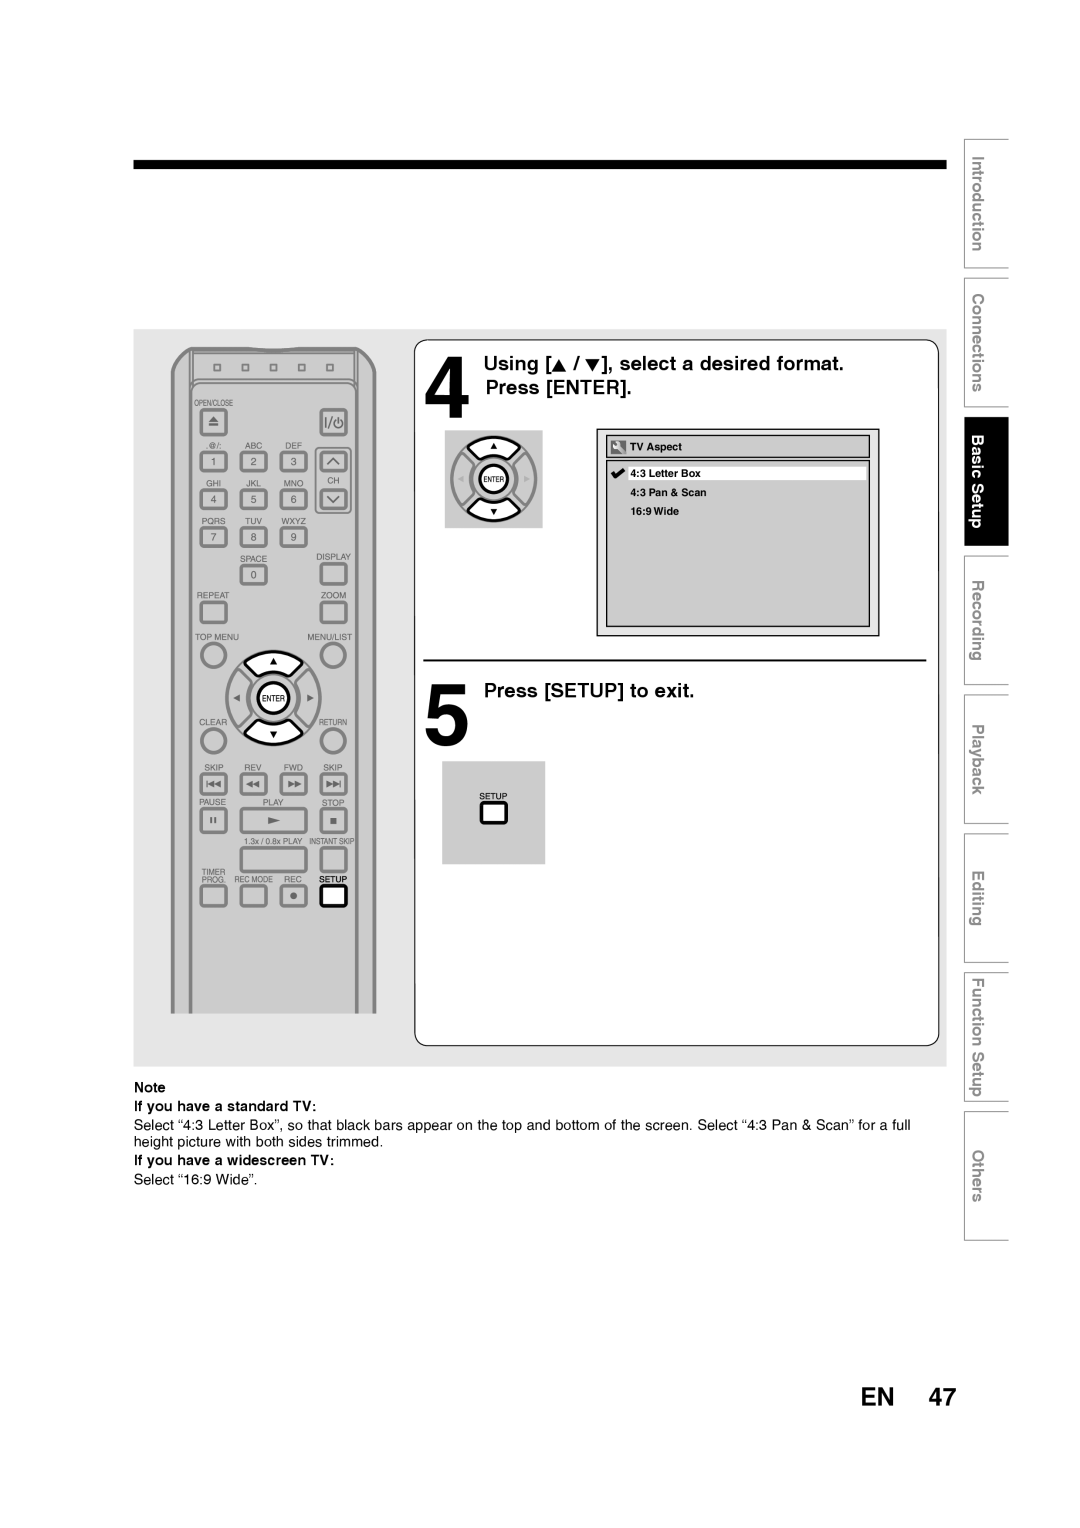 Toshiba D-RW2SU/D-RW2SC Using K / L, select a desired format Press ENTER, Press SETUP to exit, If you have a standard TV 